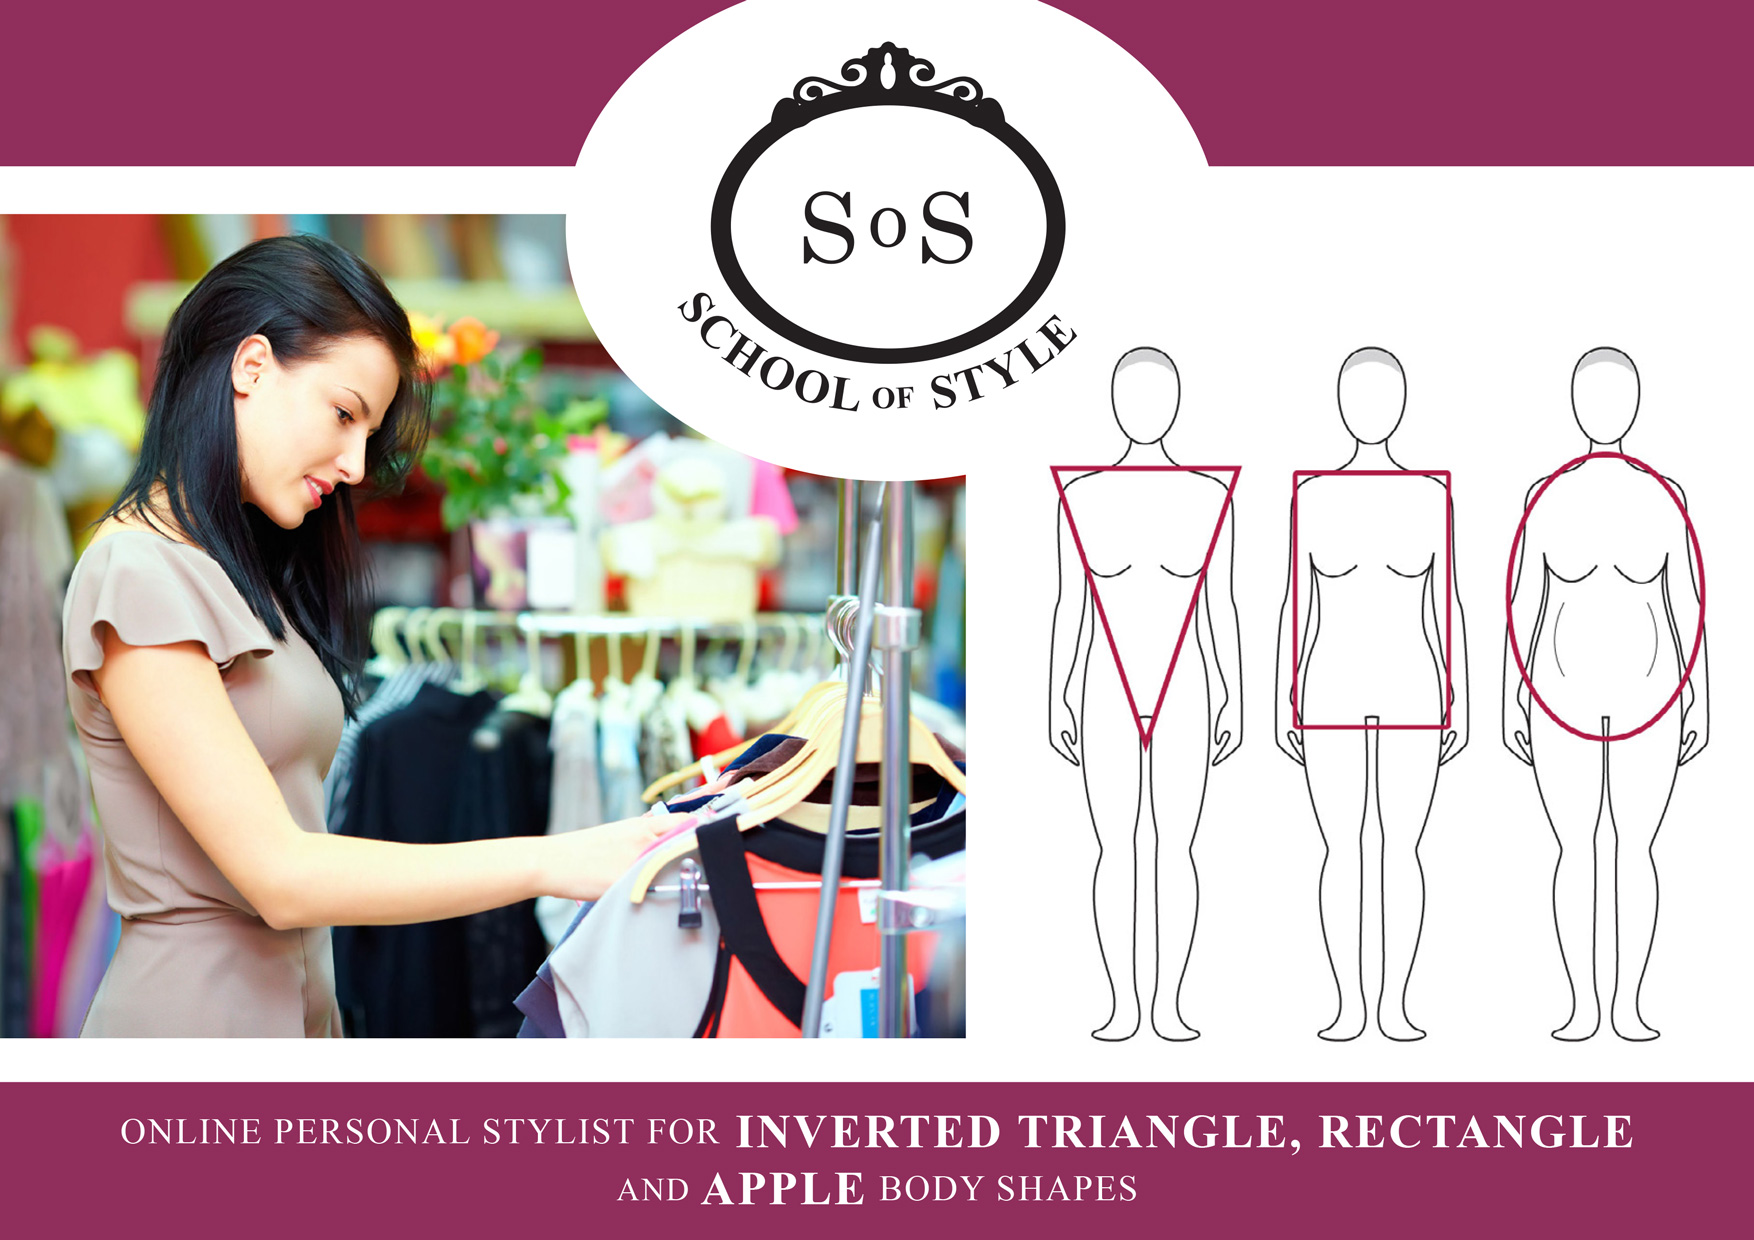 How To Dress If You Have an Inverted Triangle Body Shape